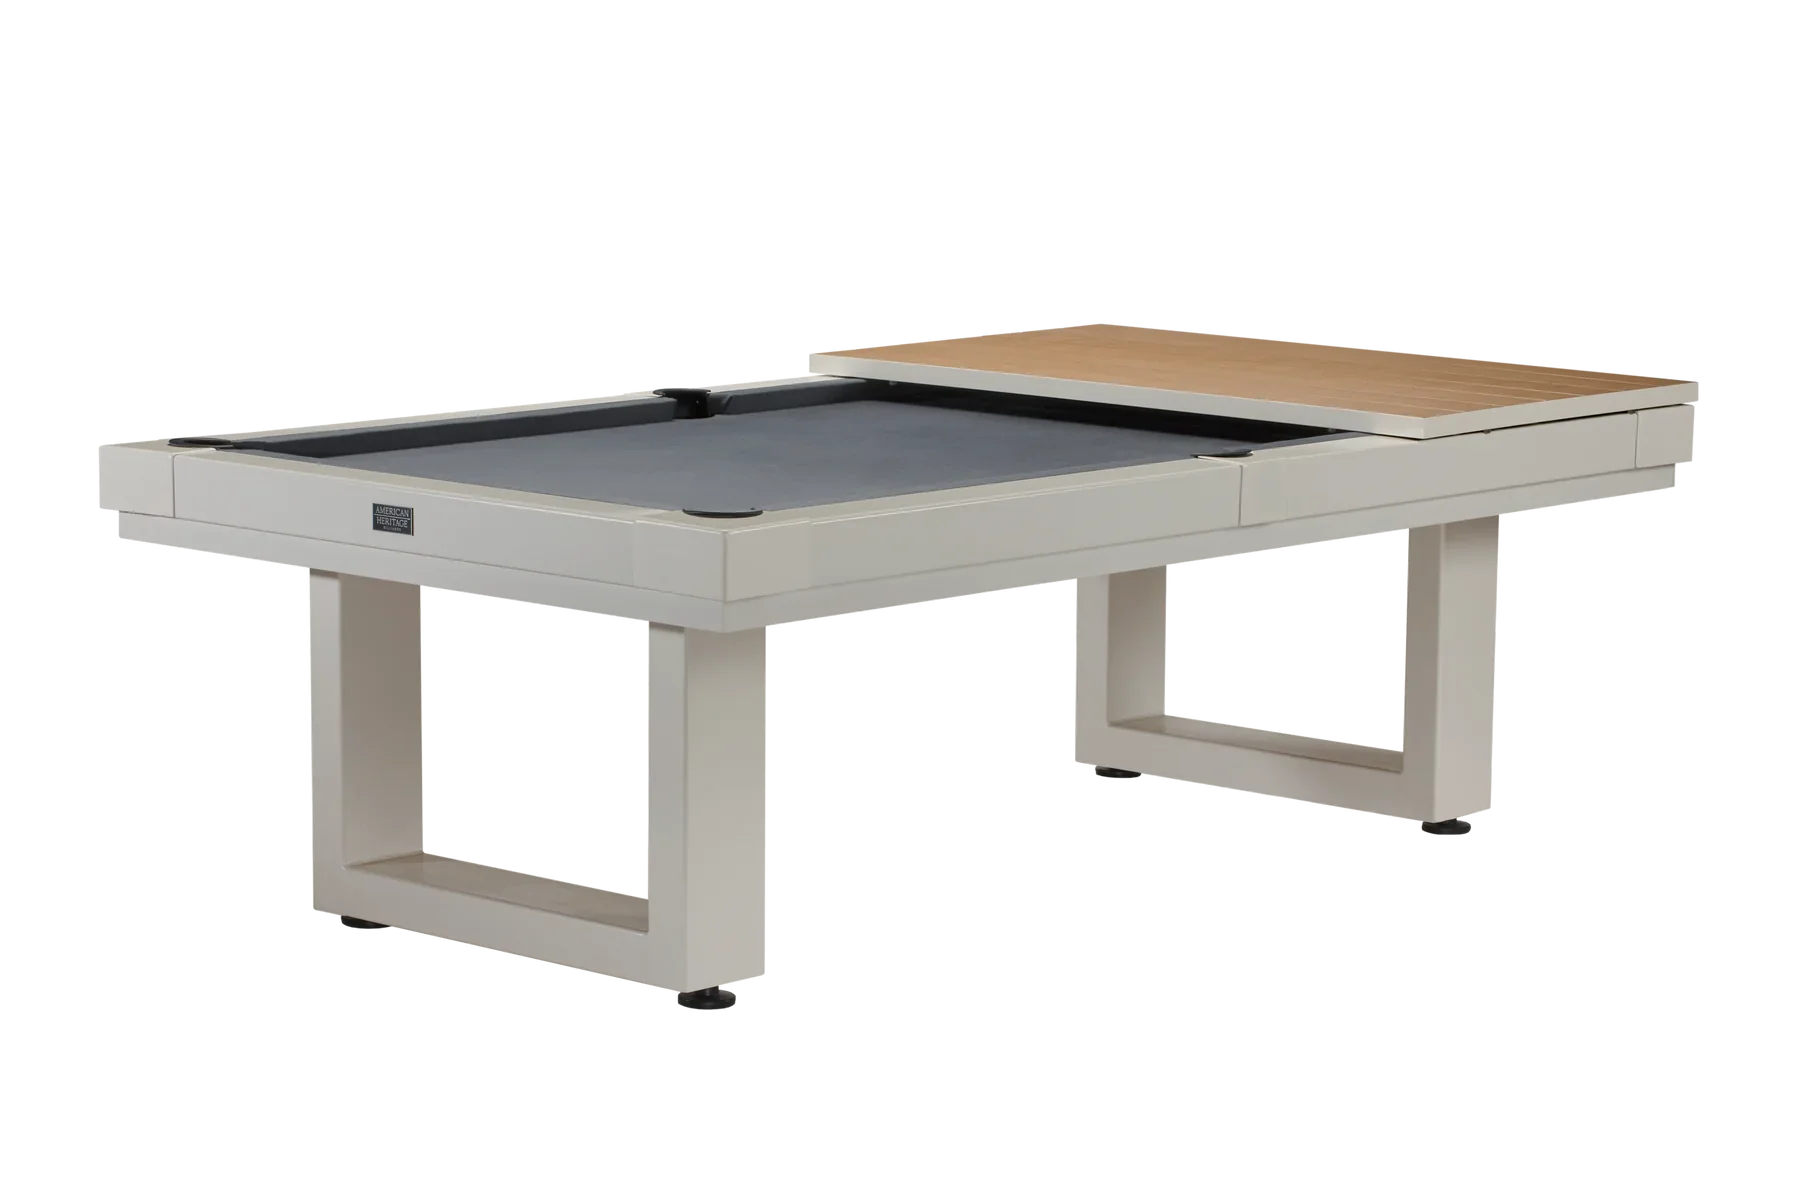 American Heritage Billiards Lanai Outdoor 8' Dining Top in Oyster Grey